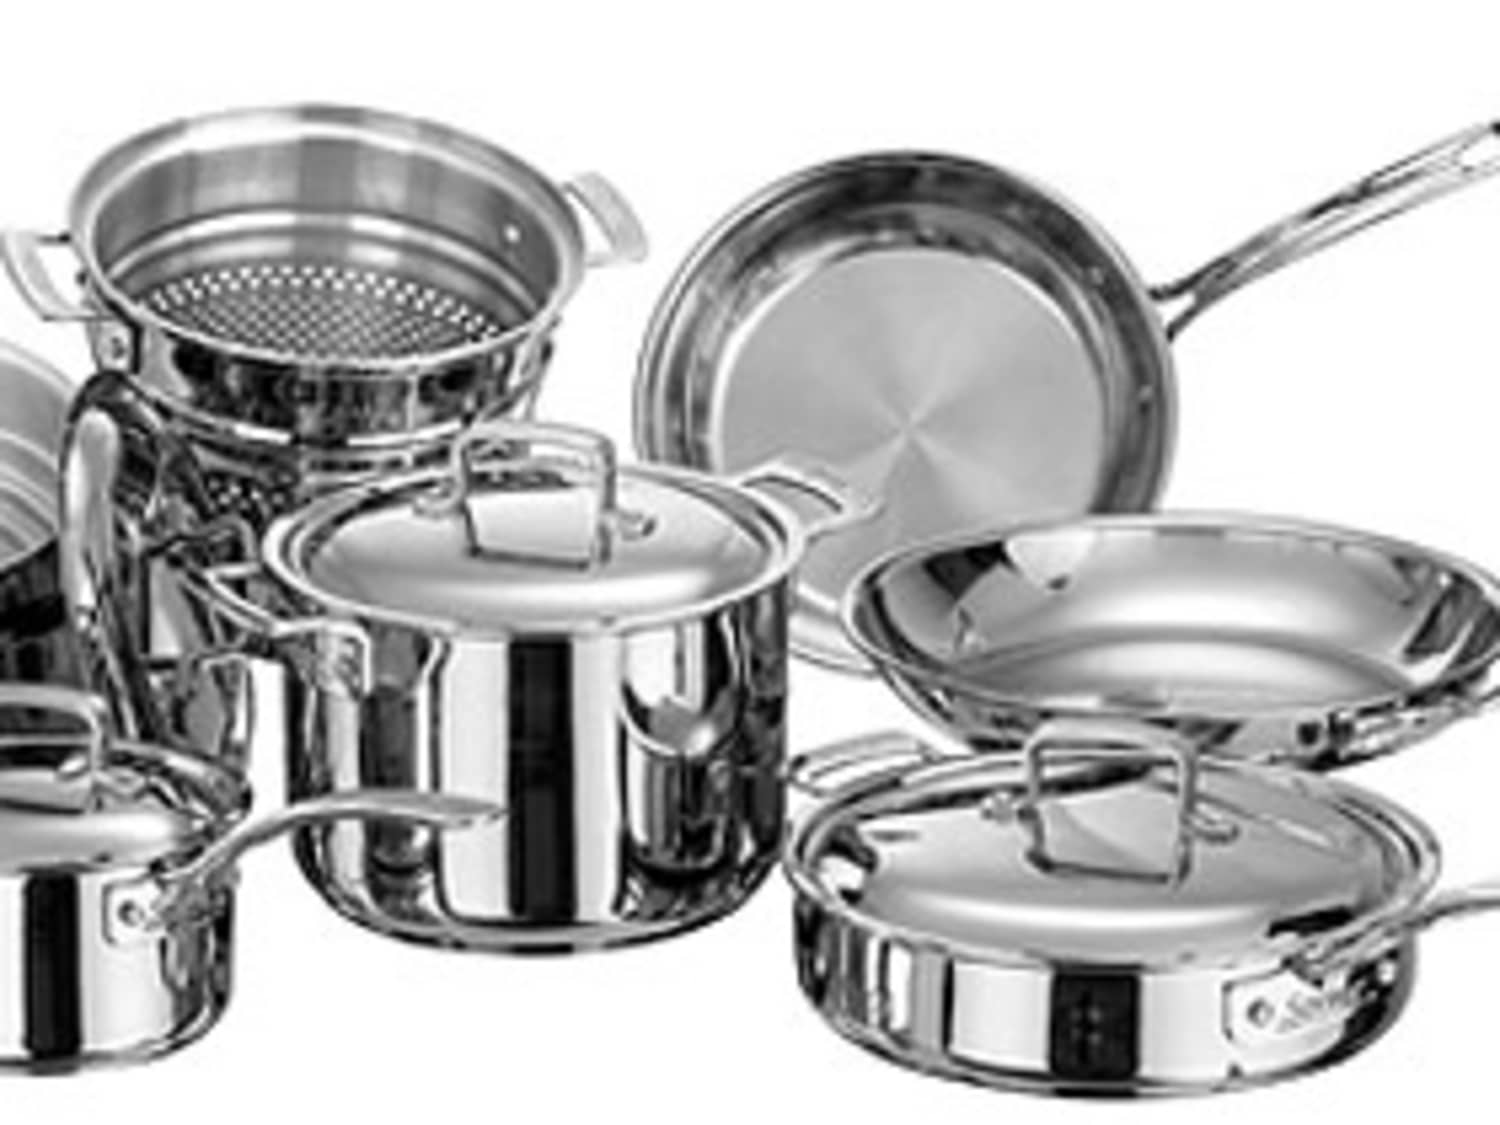 Add a feature to ordinary pots and pans - CNET